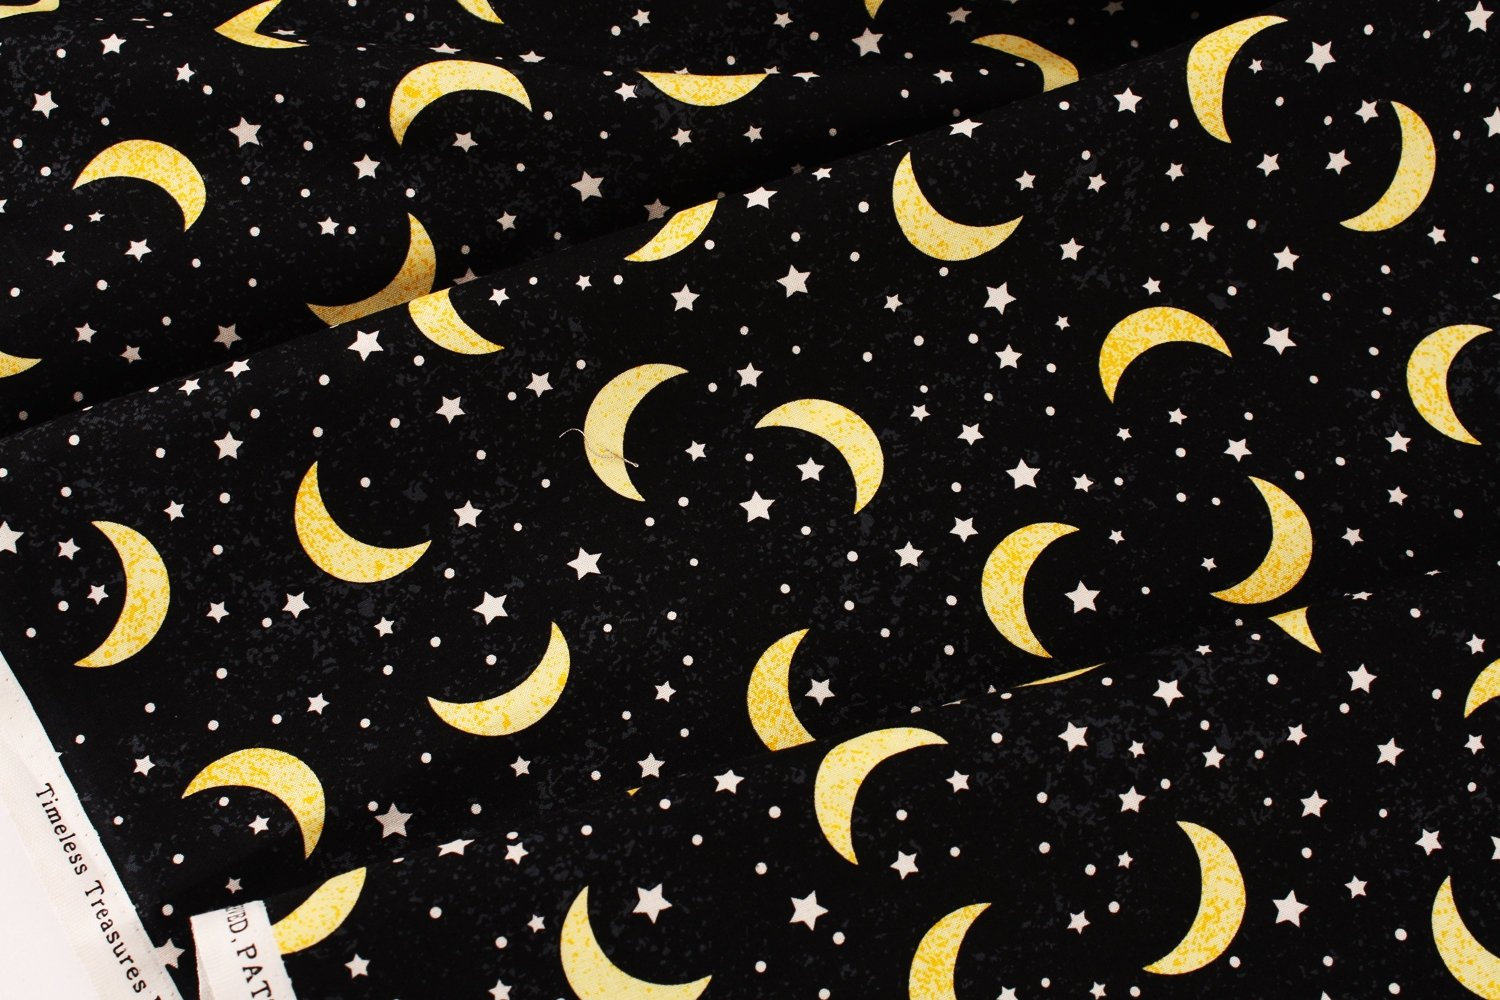 Stars and Moon printed Fabric by Timeless Treasures Fabrics by | Etsy